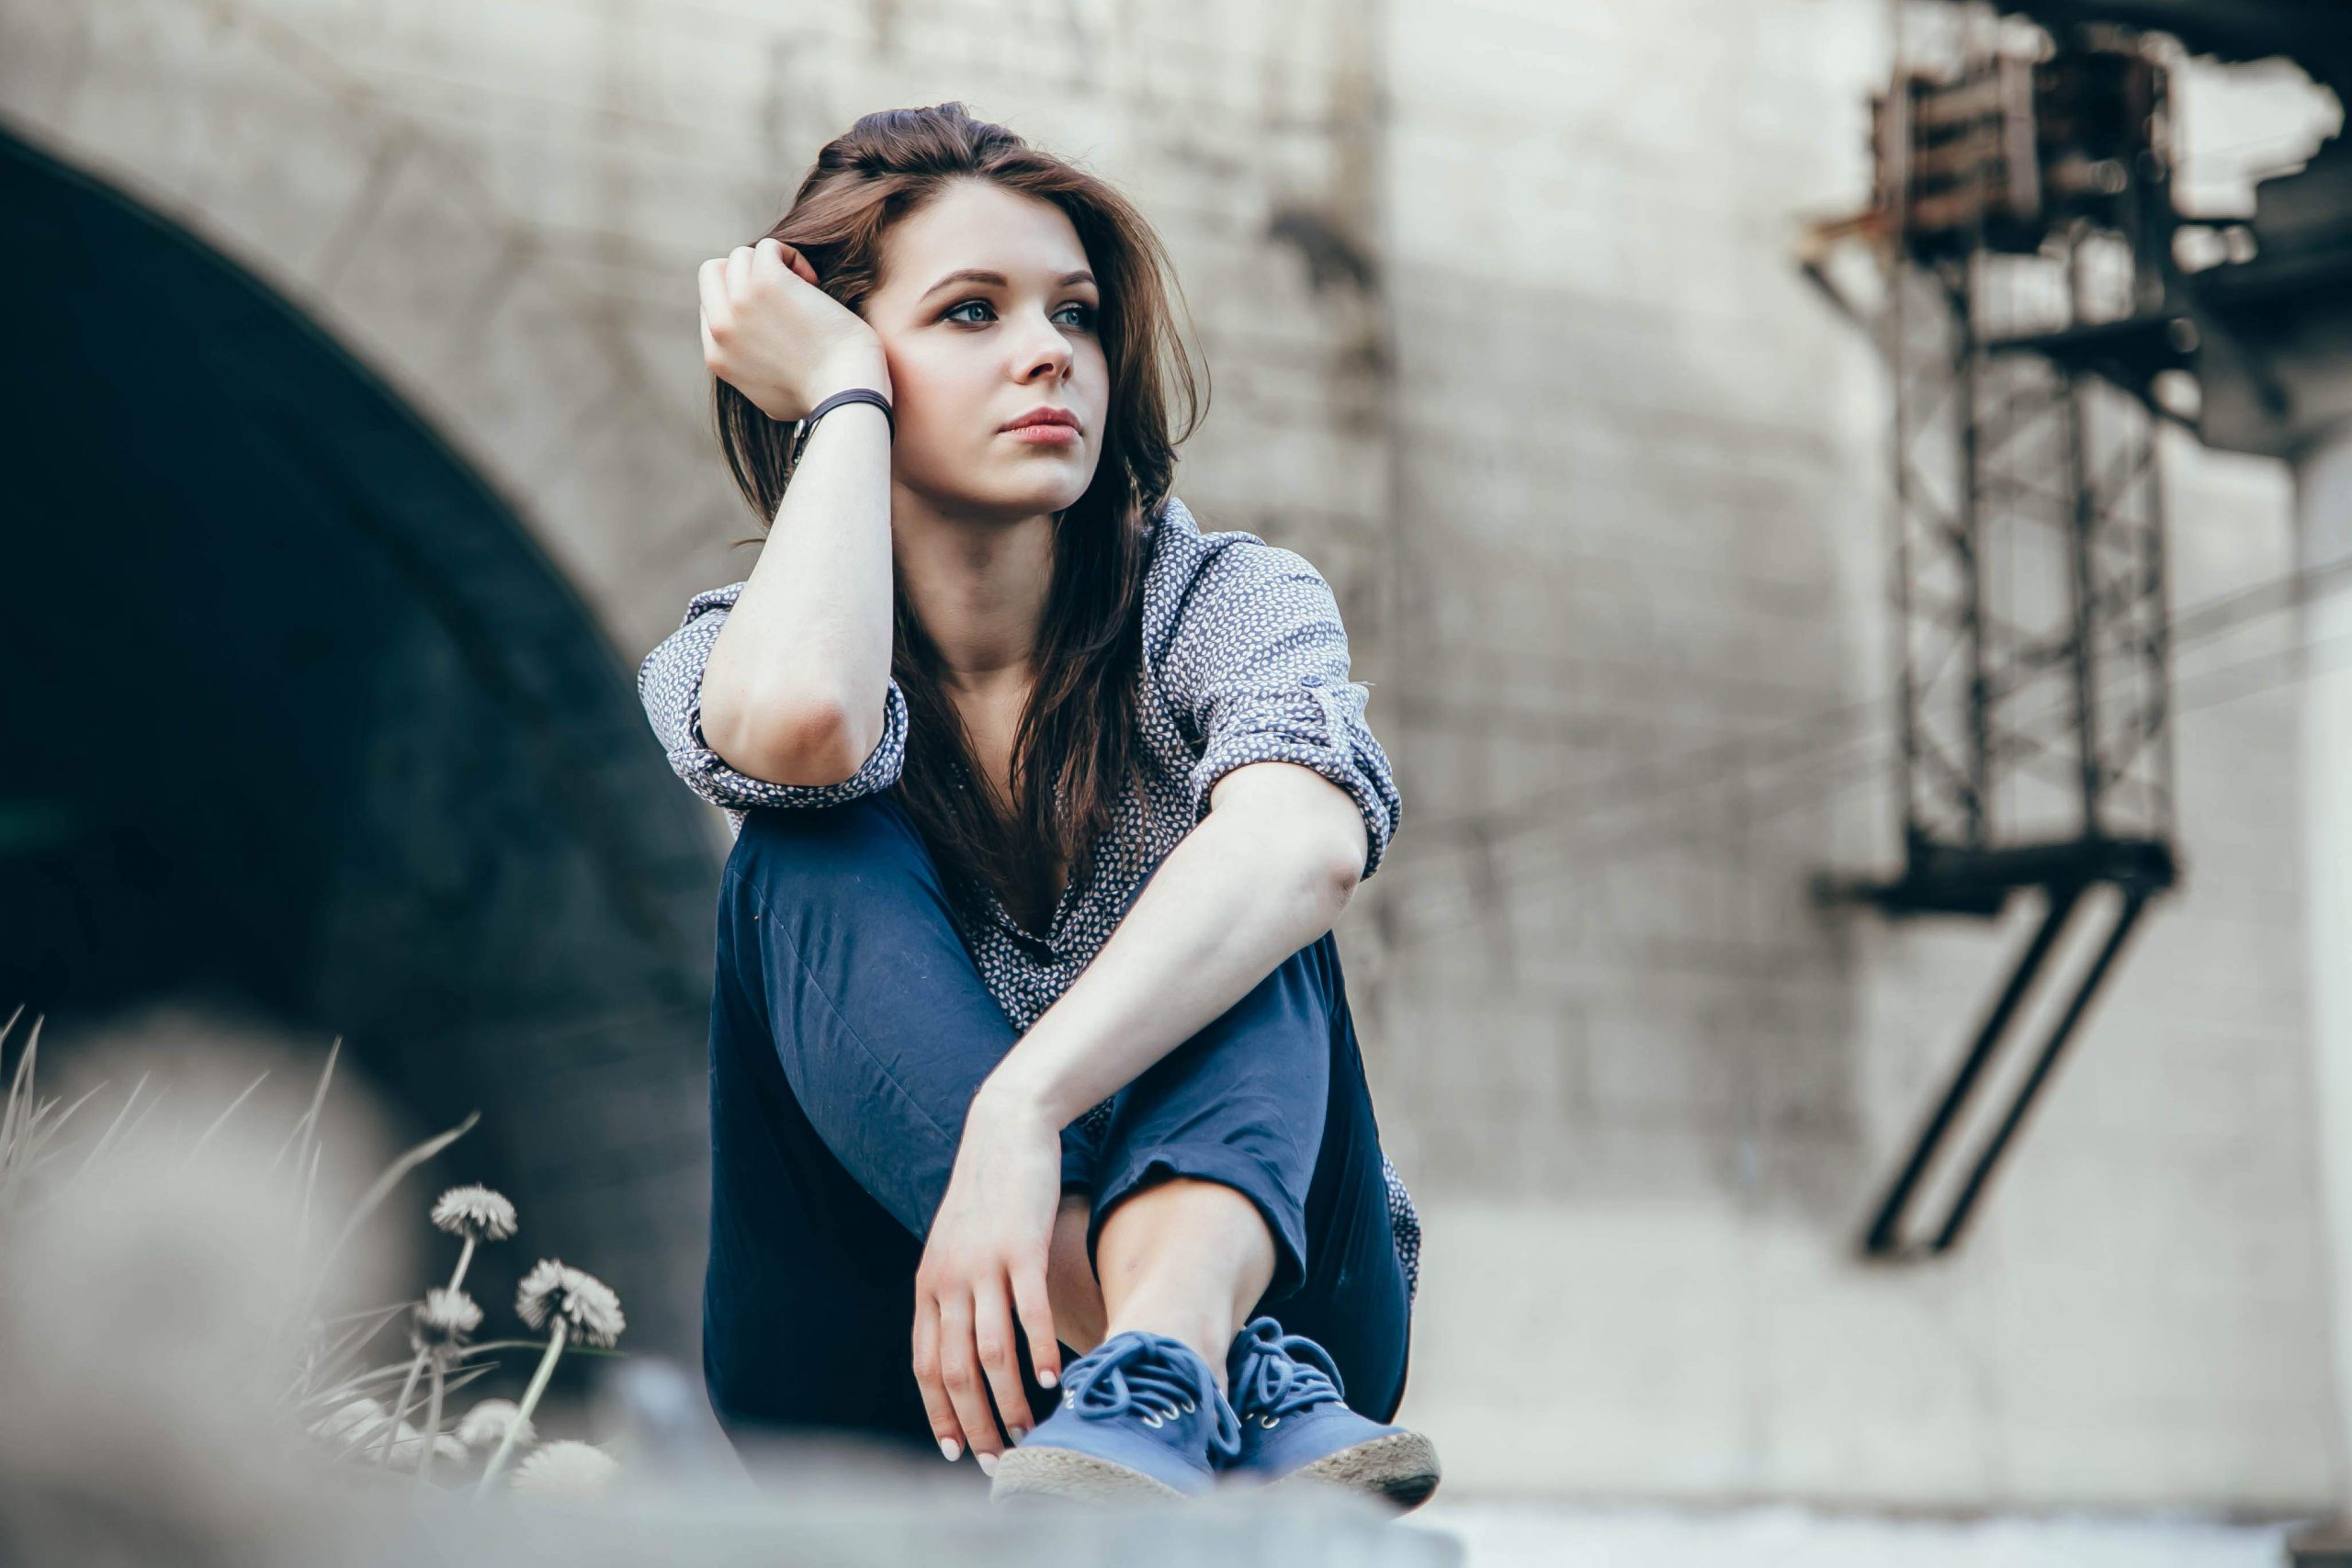 anaheimlighthouse-how-can-i-pick-up-the-pieces-after-relapse-article-photo-outdoors-portrait-of-beautiful-young-sad-teen-girl-sitting-on-stairs-667552237